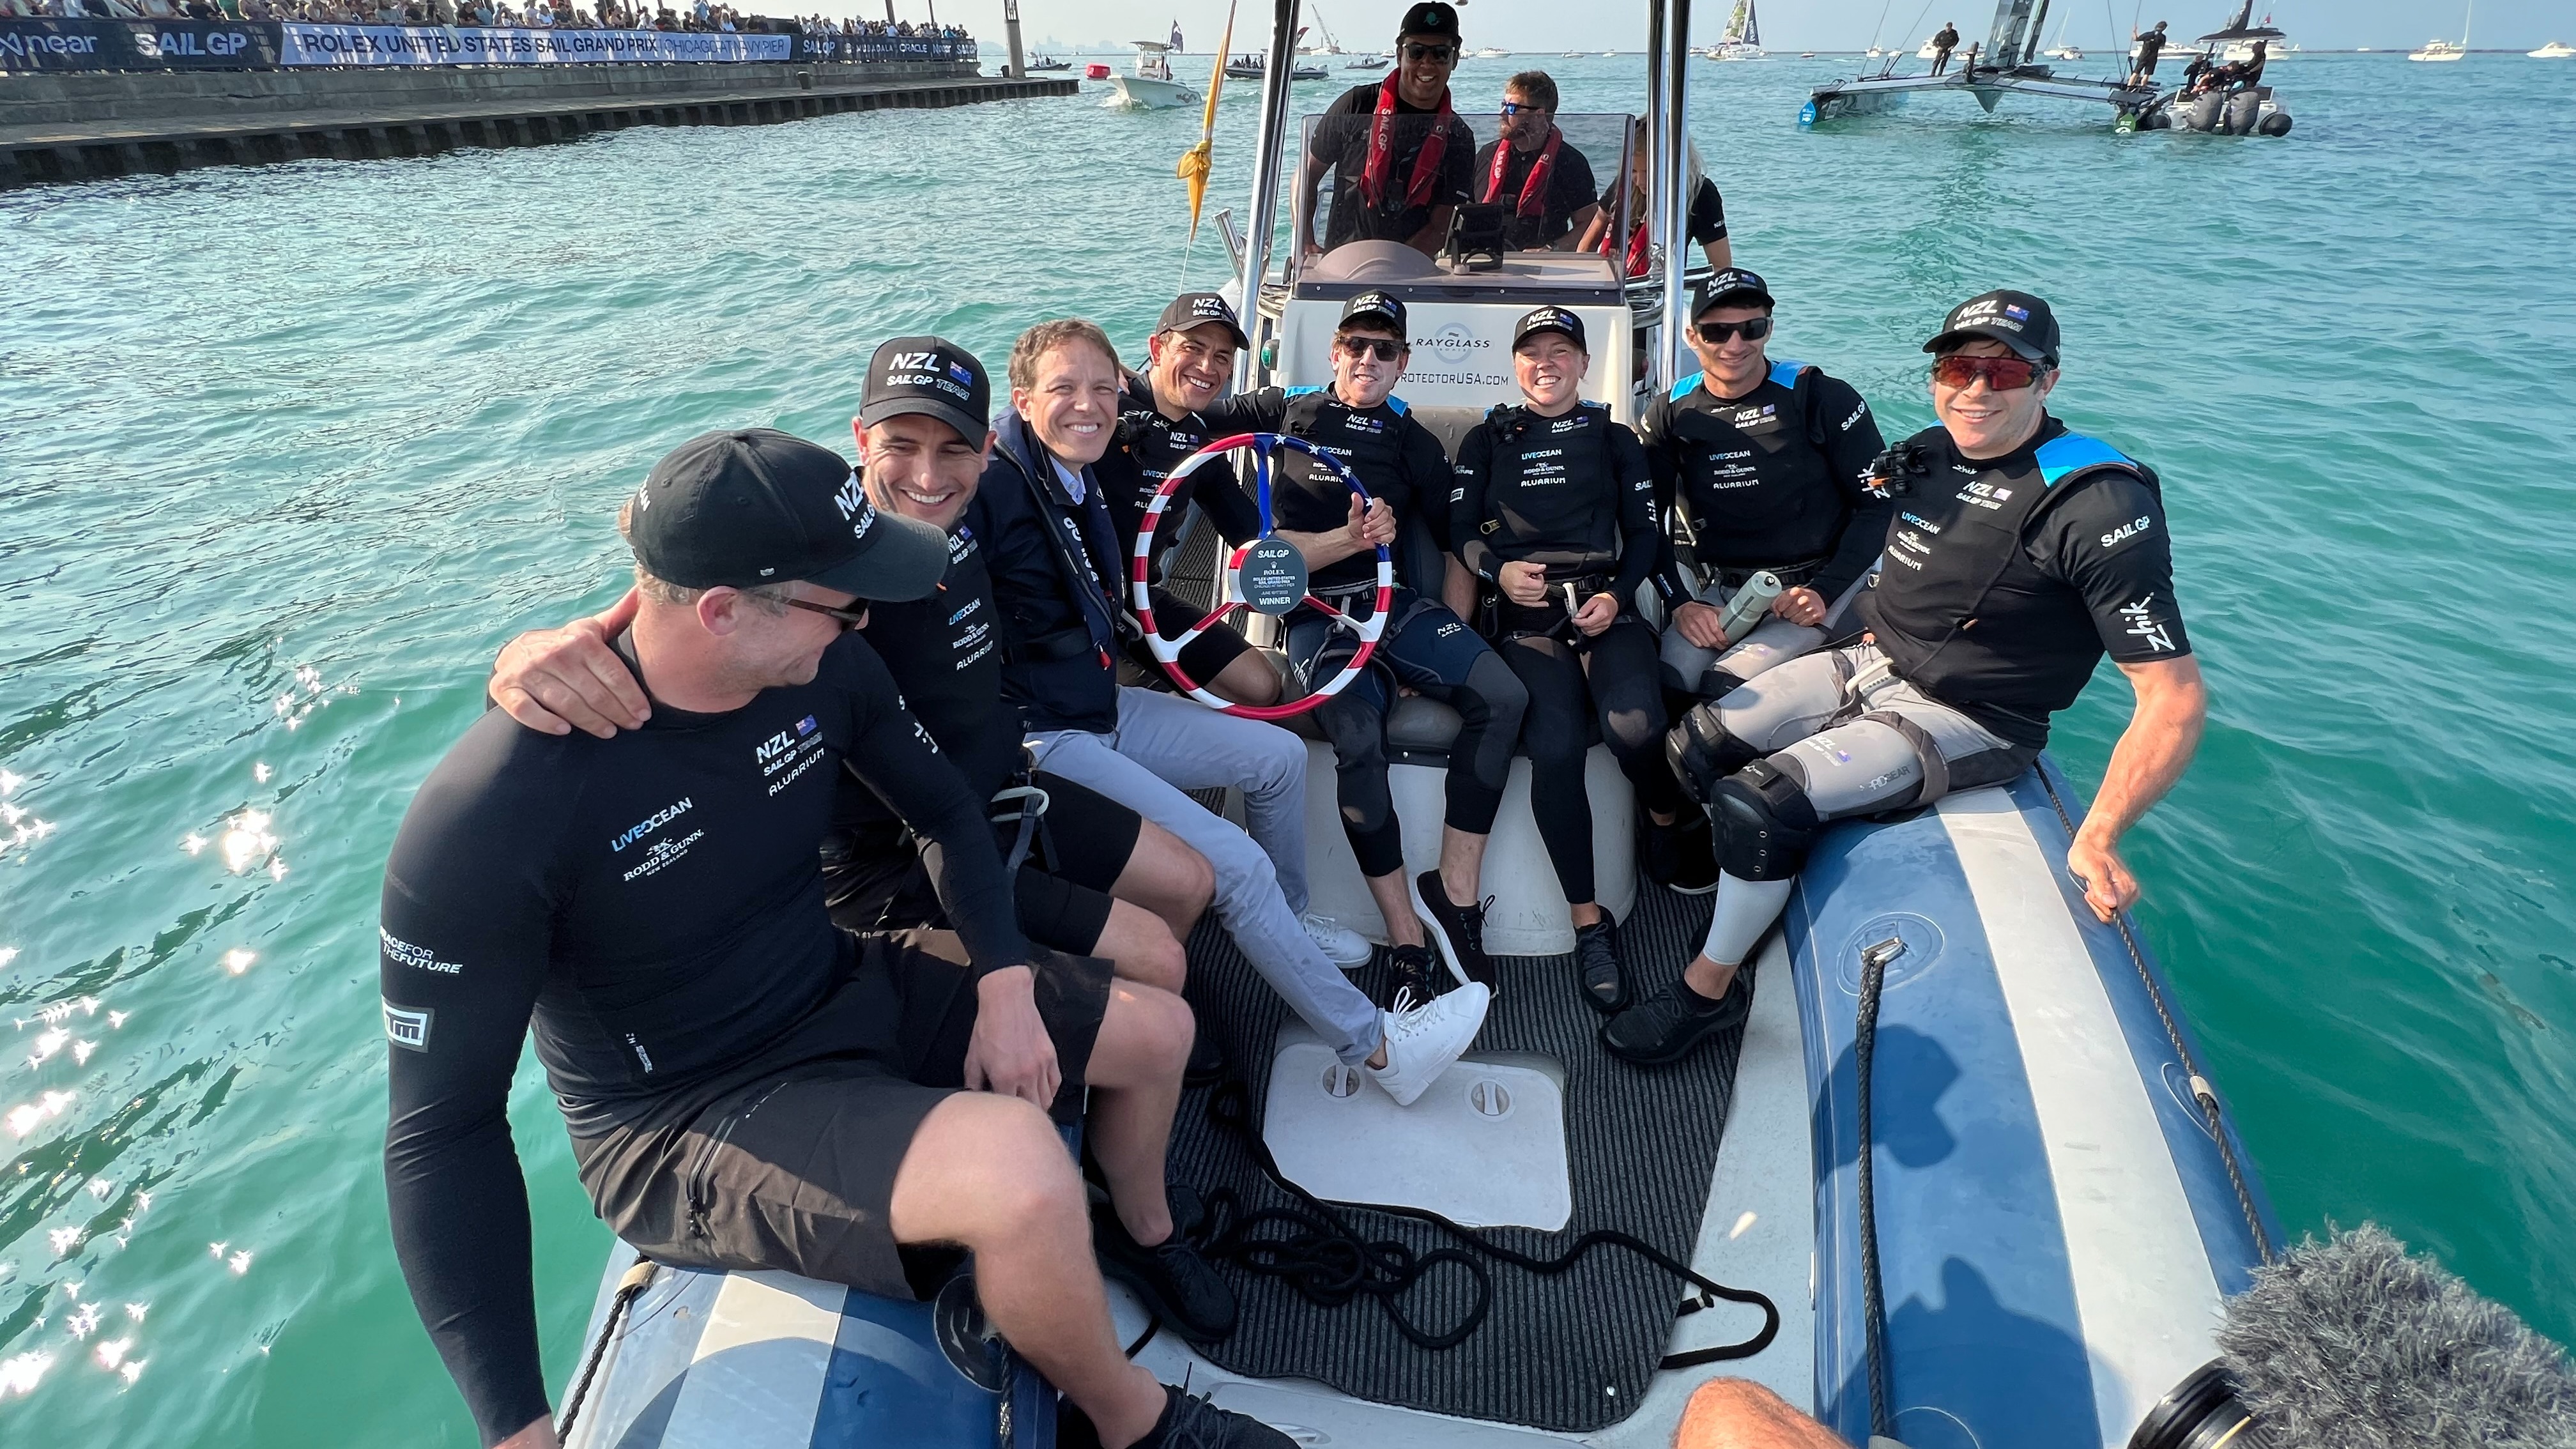 Season 4 // Inspire Careers Candidate Preston Anderson with New Zealand team on chase boat 